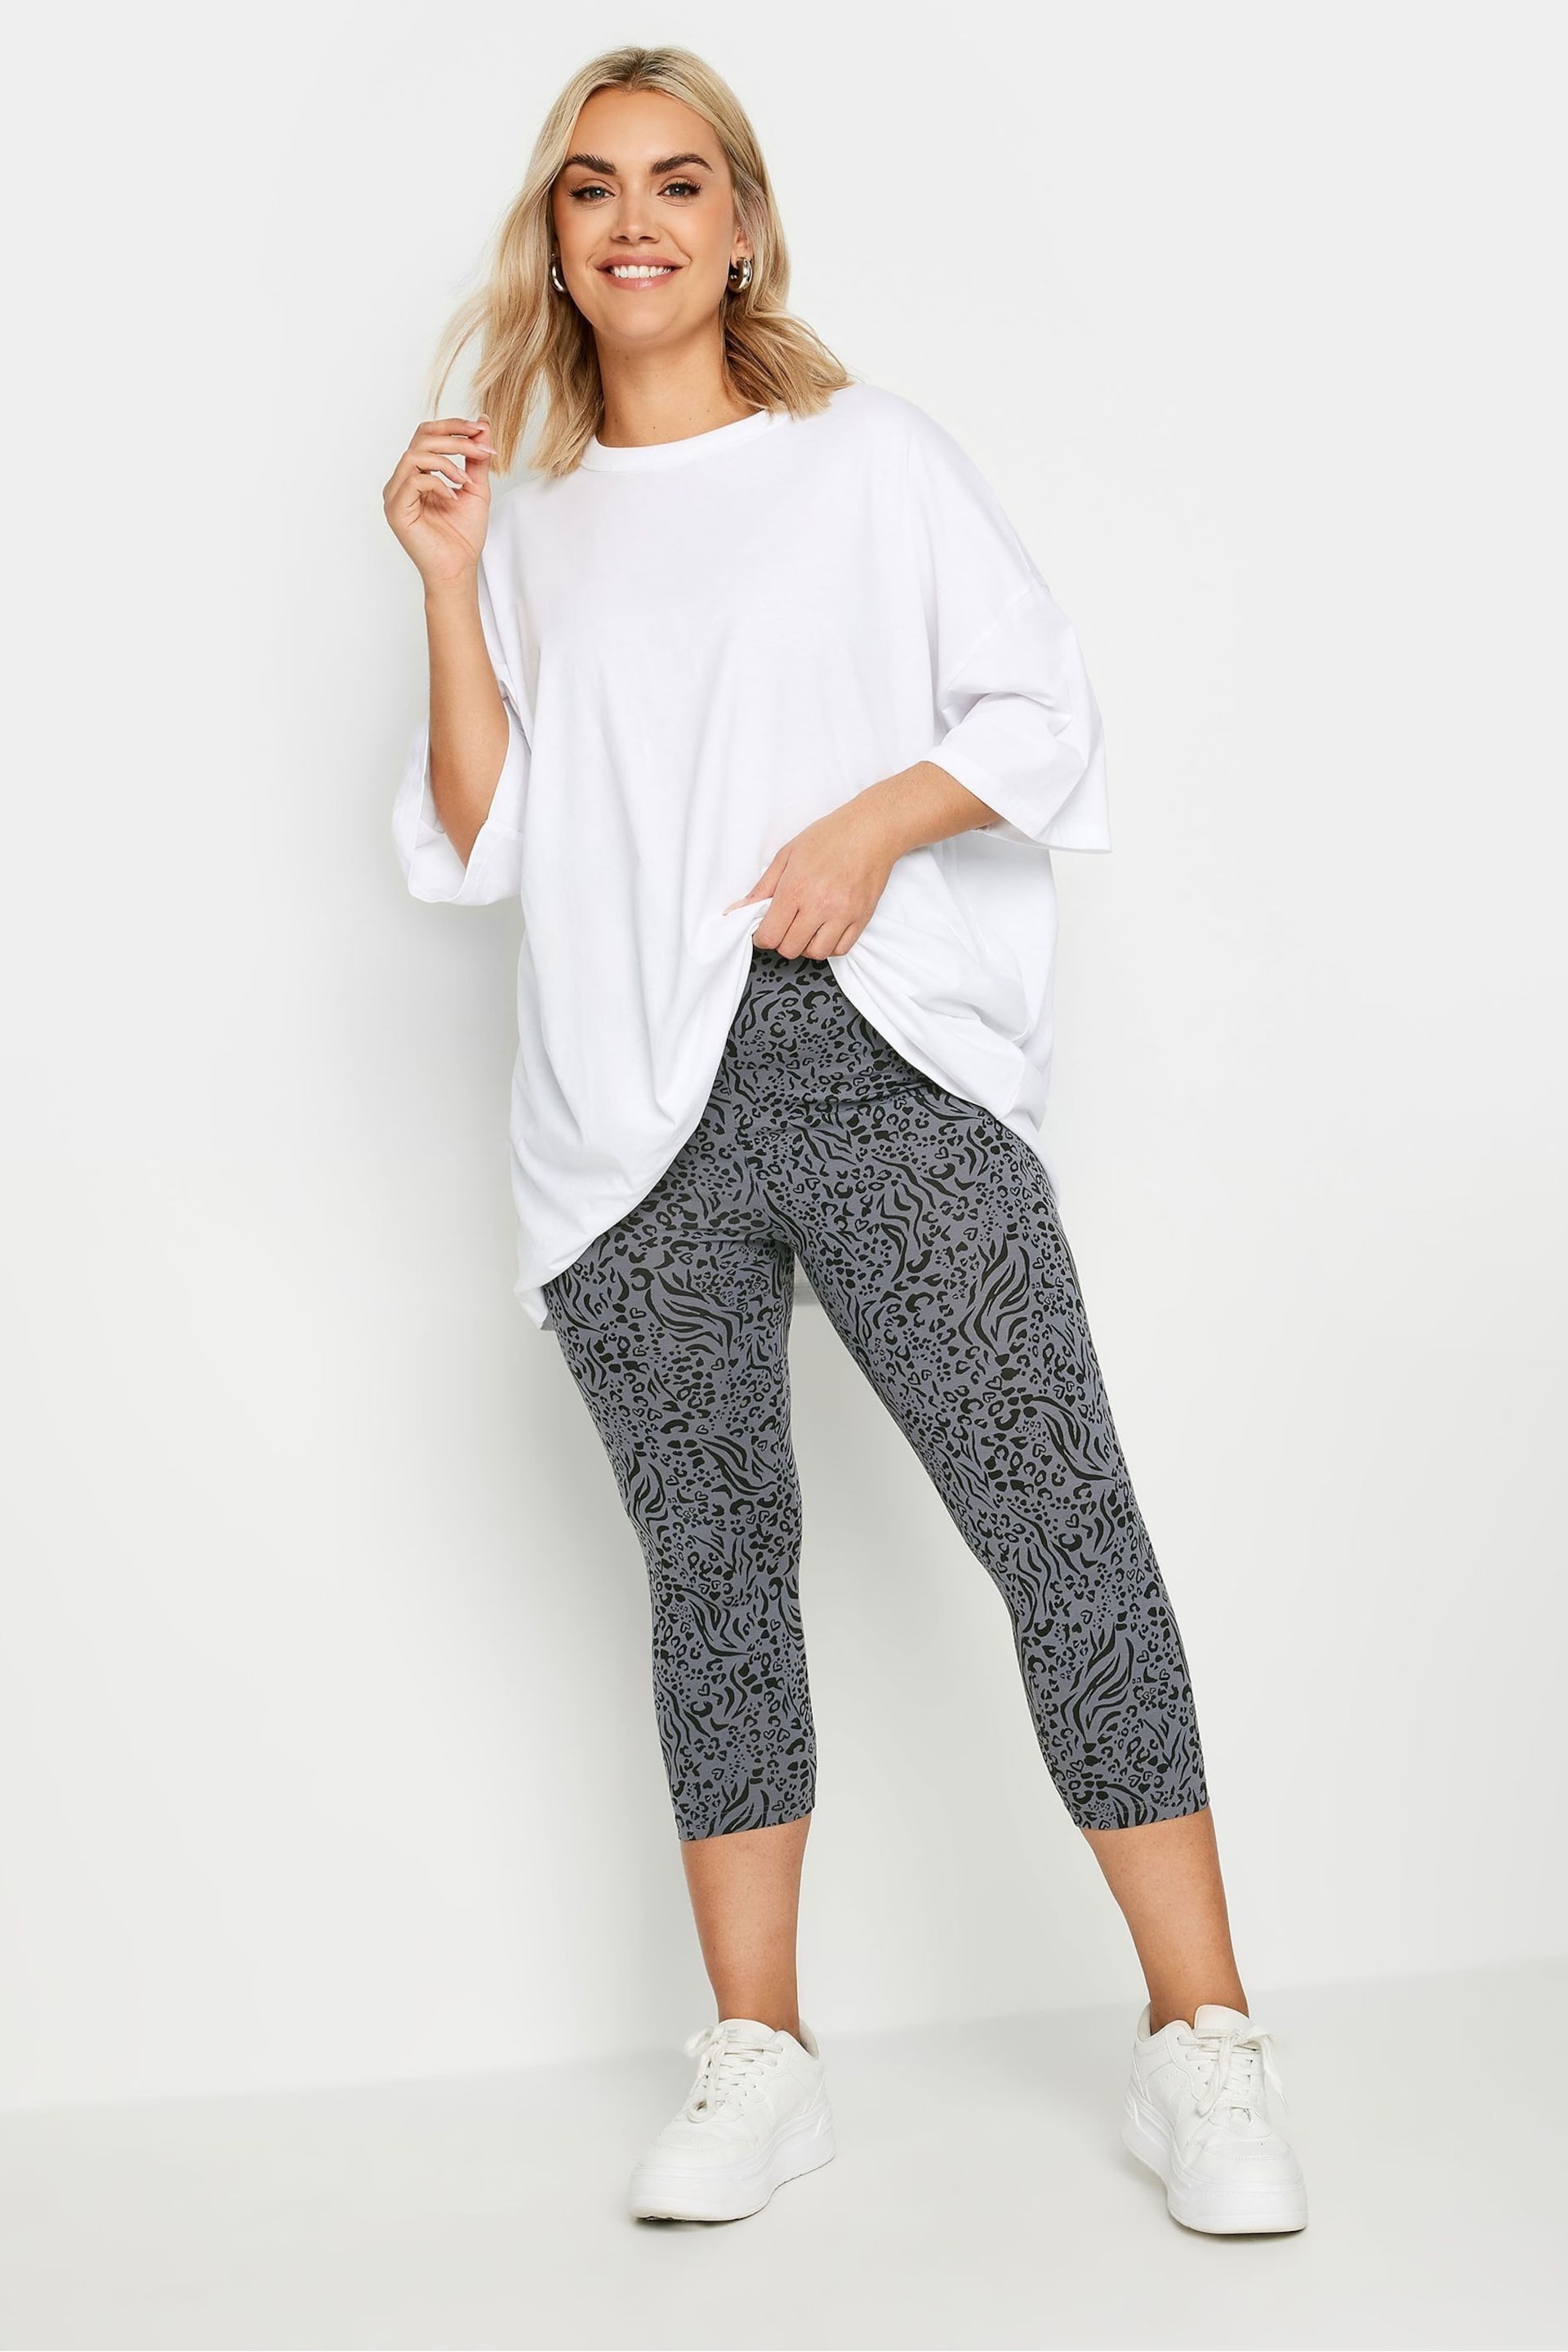 Yours Curve Grey Cropped Leggings 2 Pack - Image 2 of 6